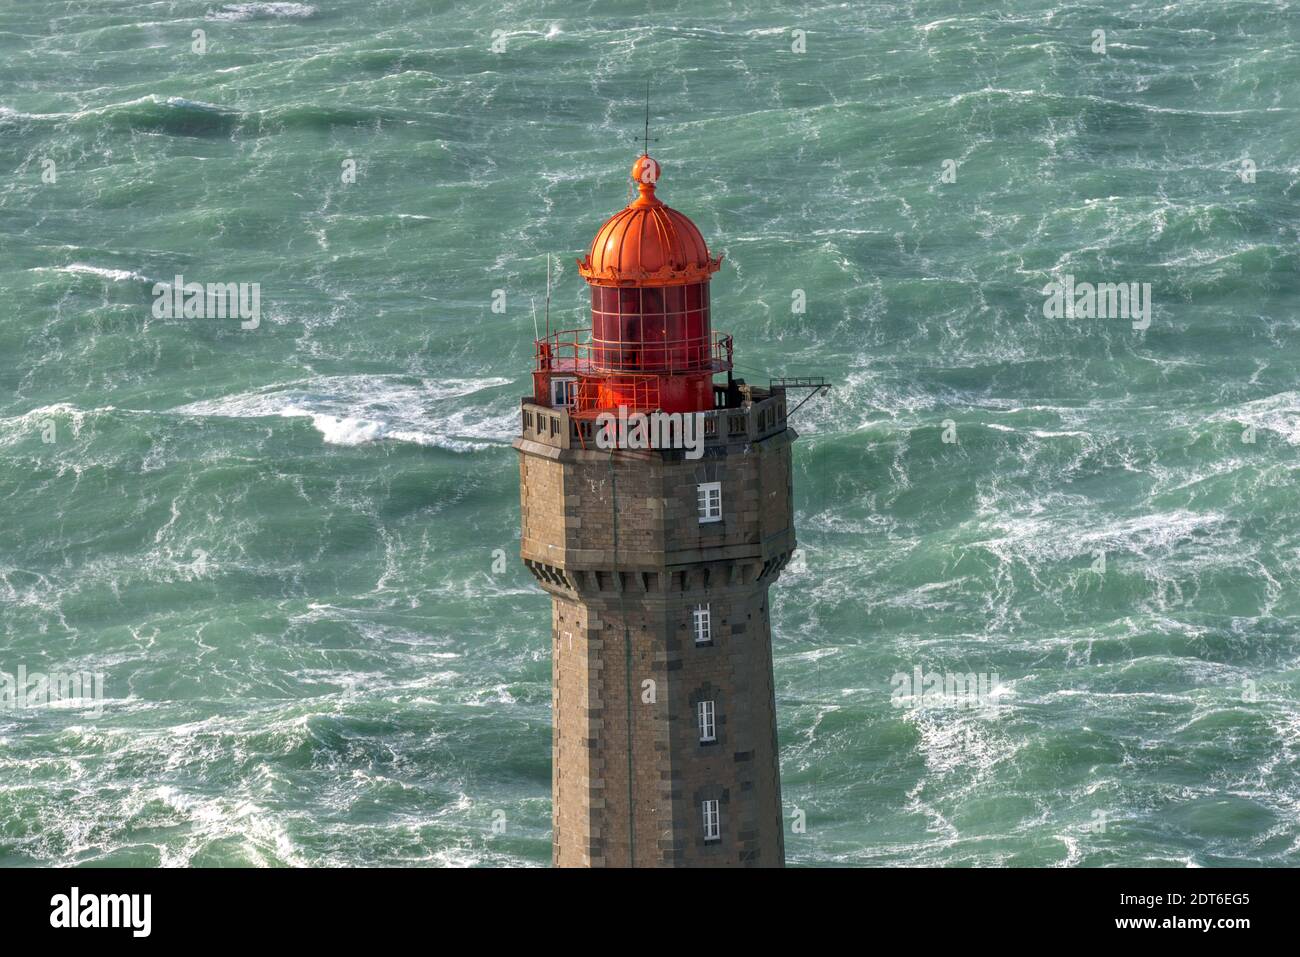 La Jument lighthouse during heavy storm off Brittany, western France on February 5, 2014. Photo by Charles Marion/ABACAPRESS.COM Stock Photo